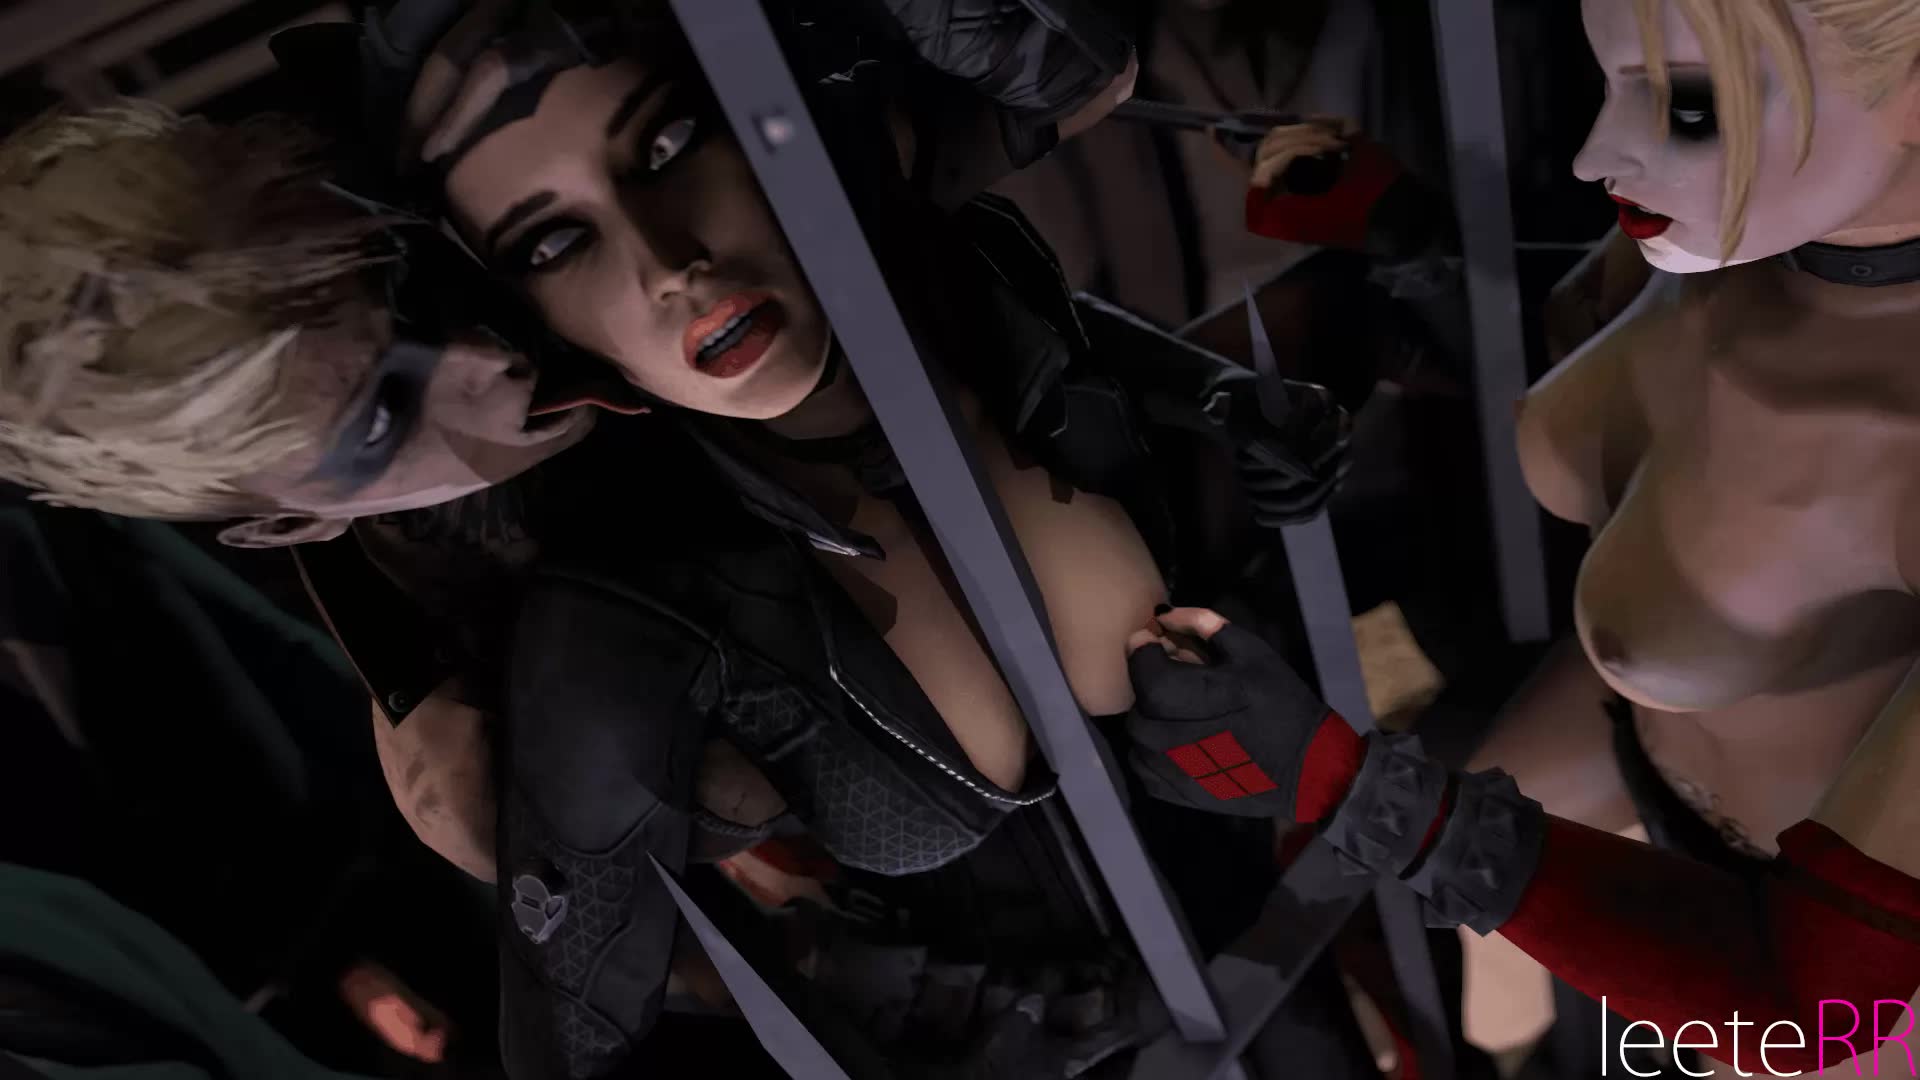 Copperhead, Catwoman and Harley in jail – DC Comics NSFW animation thumbnail